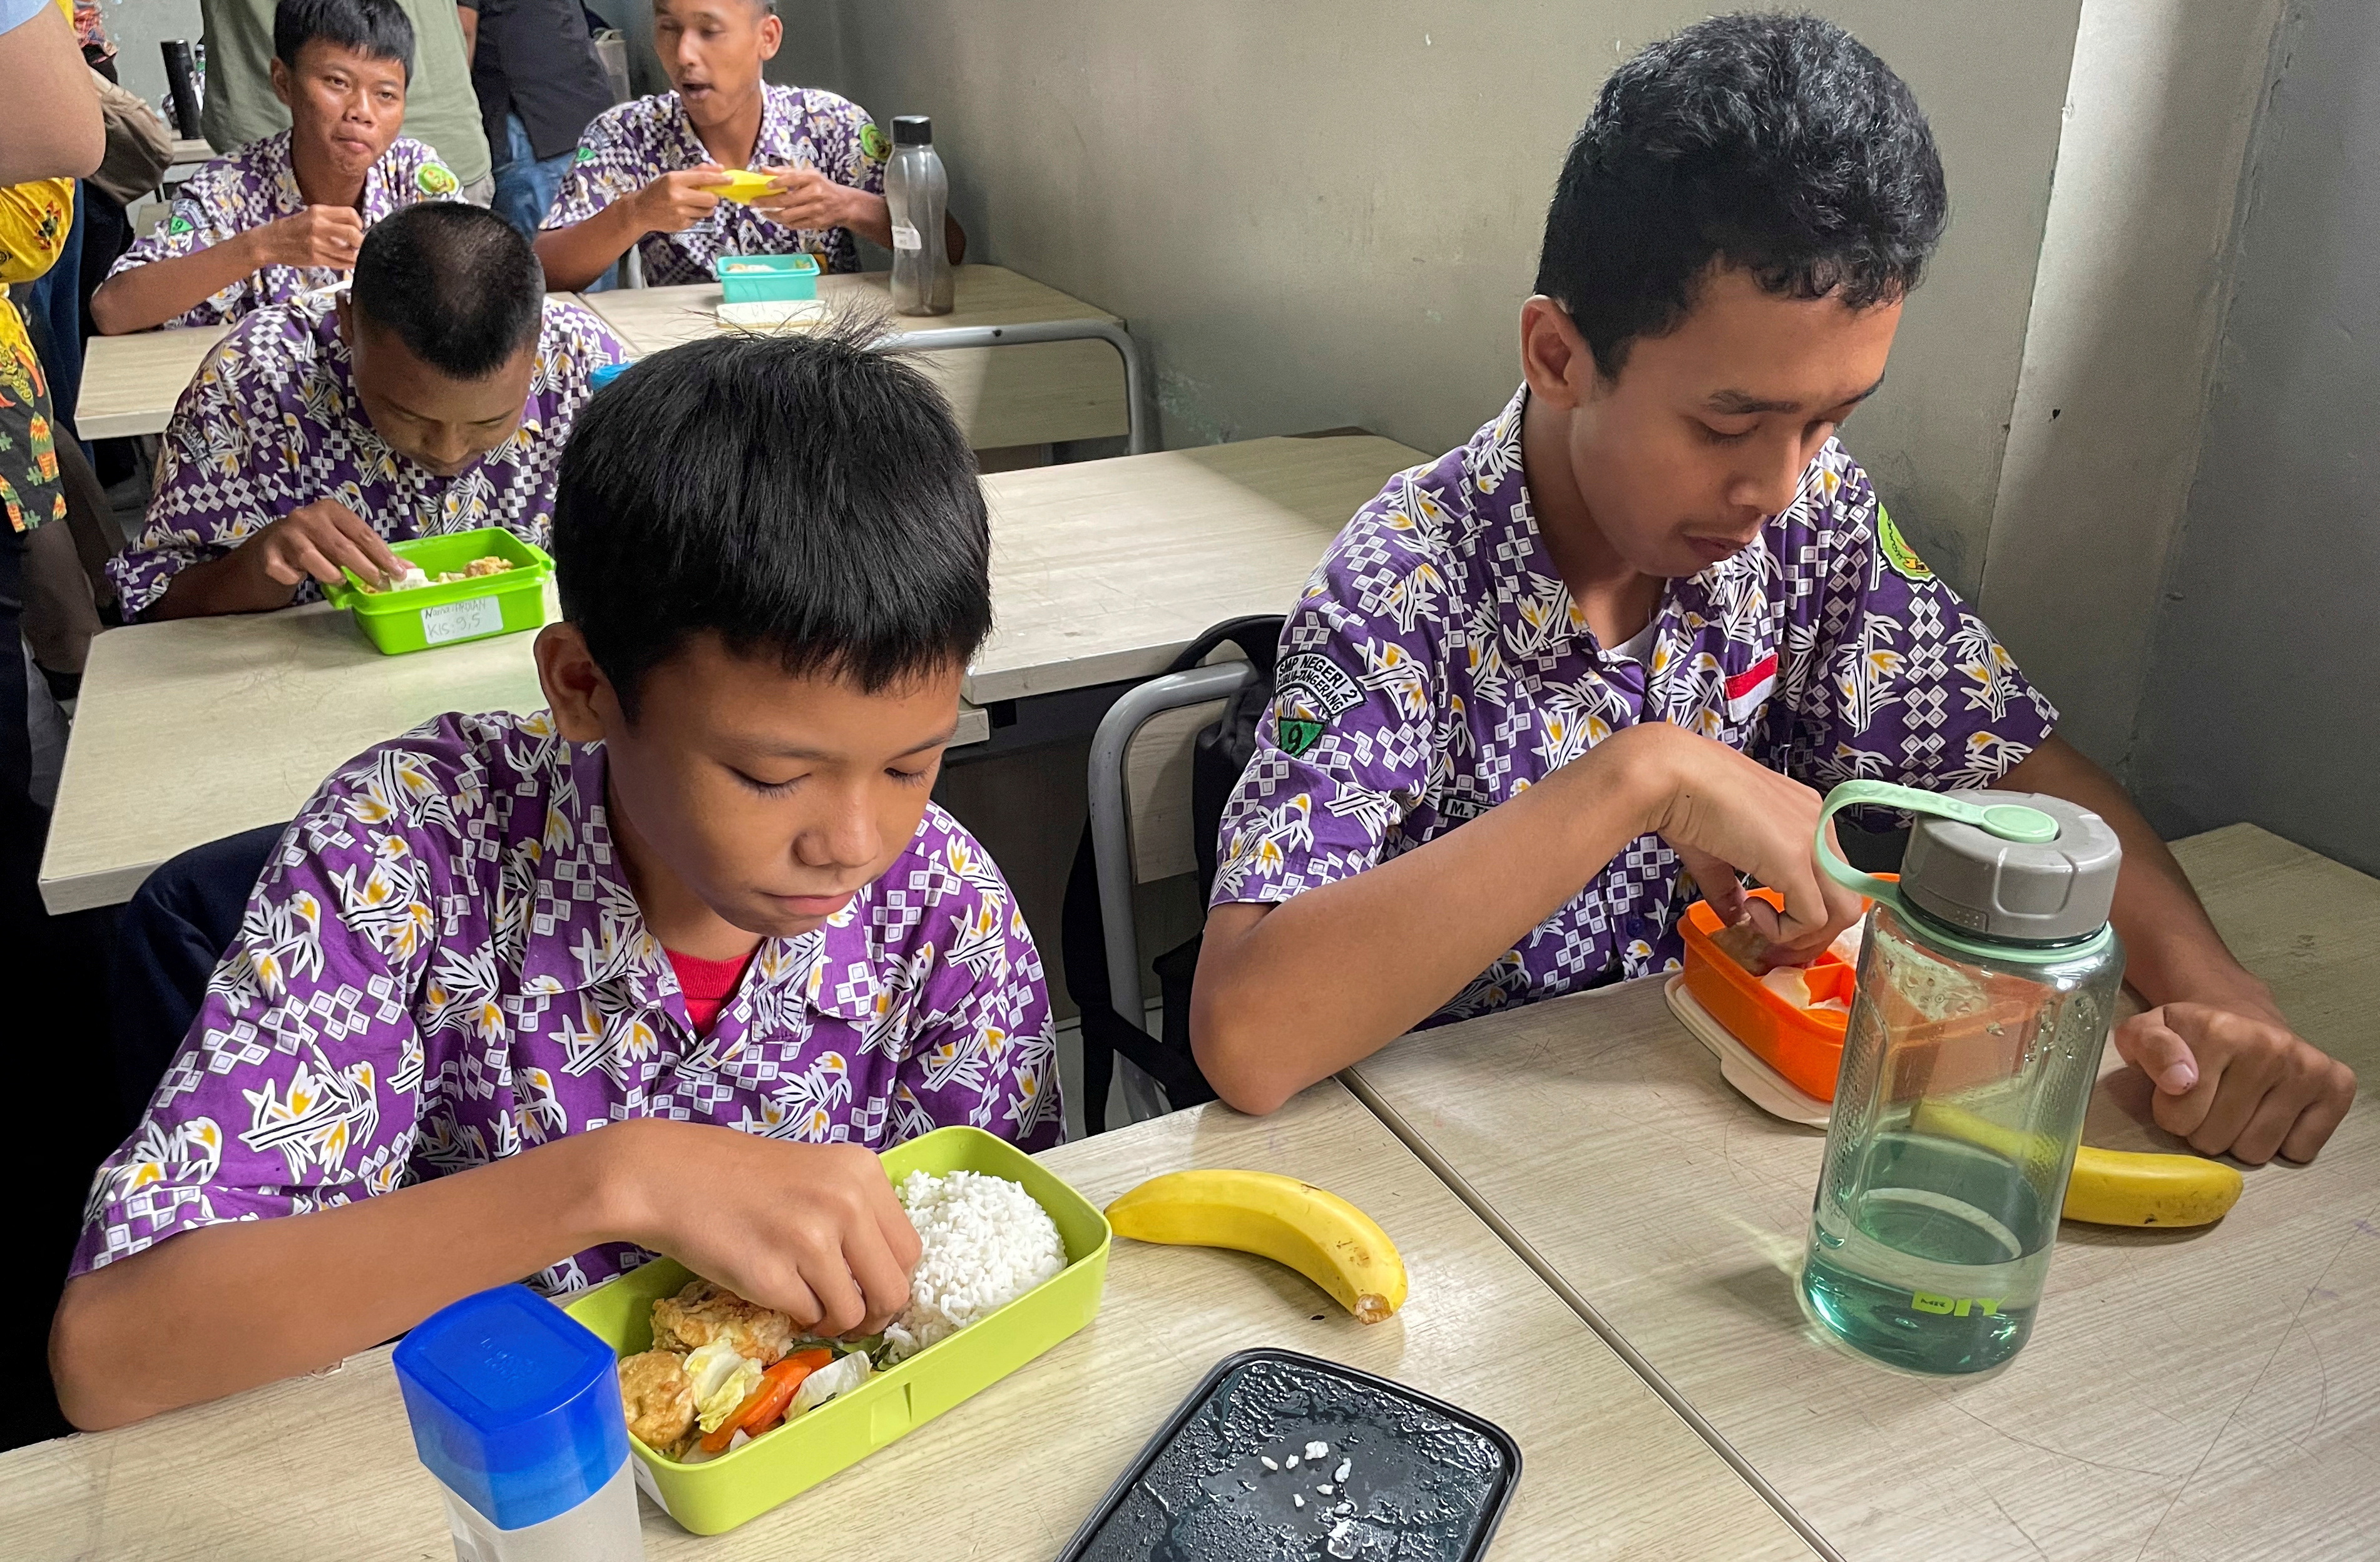 Trial of free-lunch program for students in Tangerang